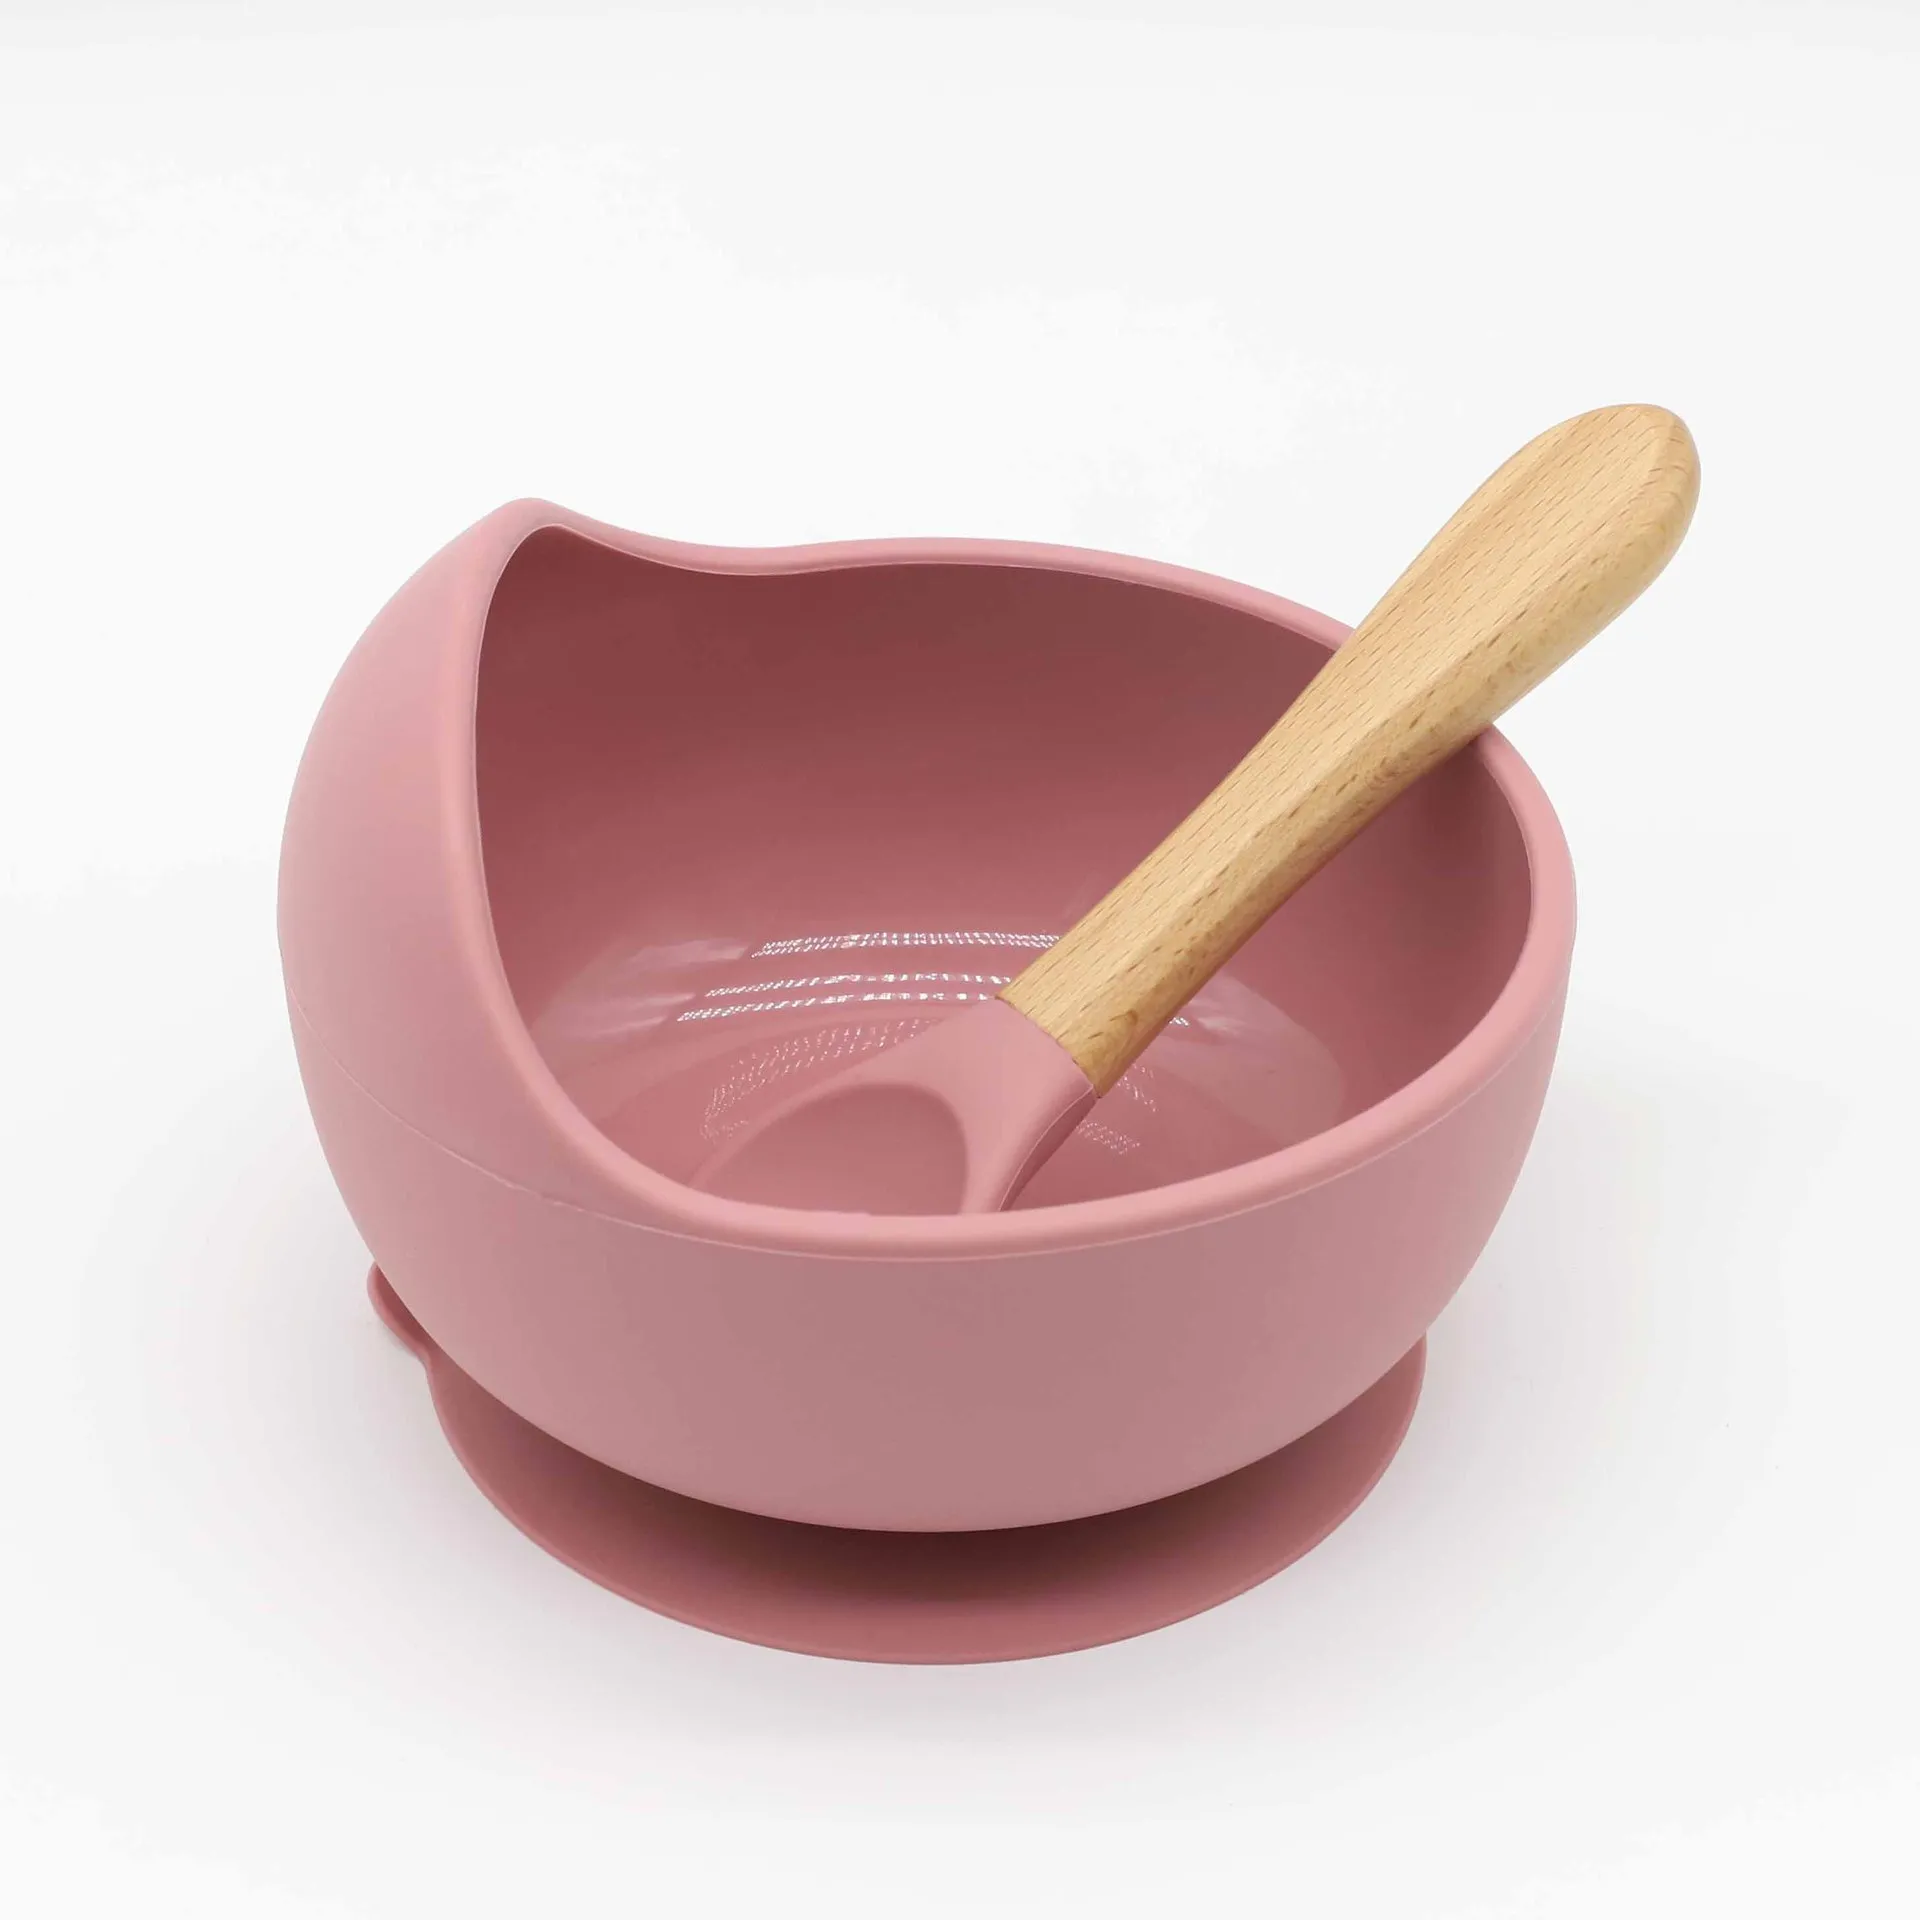 

2Pcs Baby Silicone Suction Bowl and Spoon with Wood Handle Baby Toddler Tableware Dishes Self-Feeding Utensils Set for Self-Training